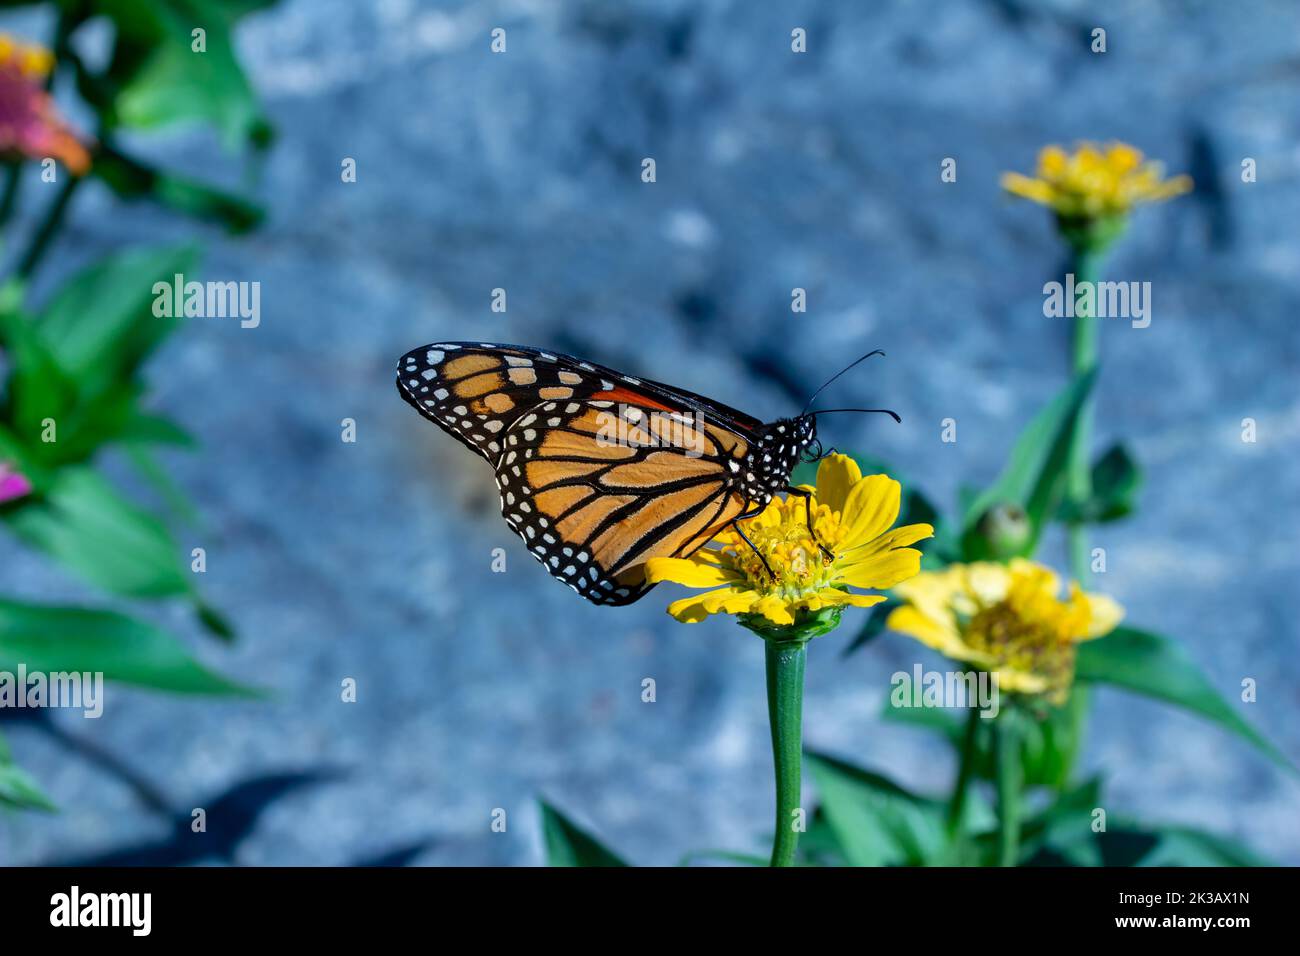 Close up view of a monarch butterfly feeding on a yellow marigold or zinnia flower in a sunny garden, with defocused background Stock Photo